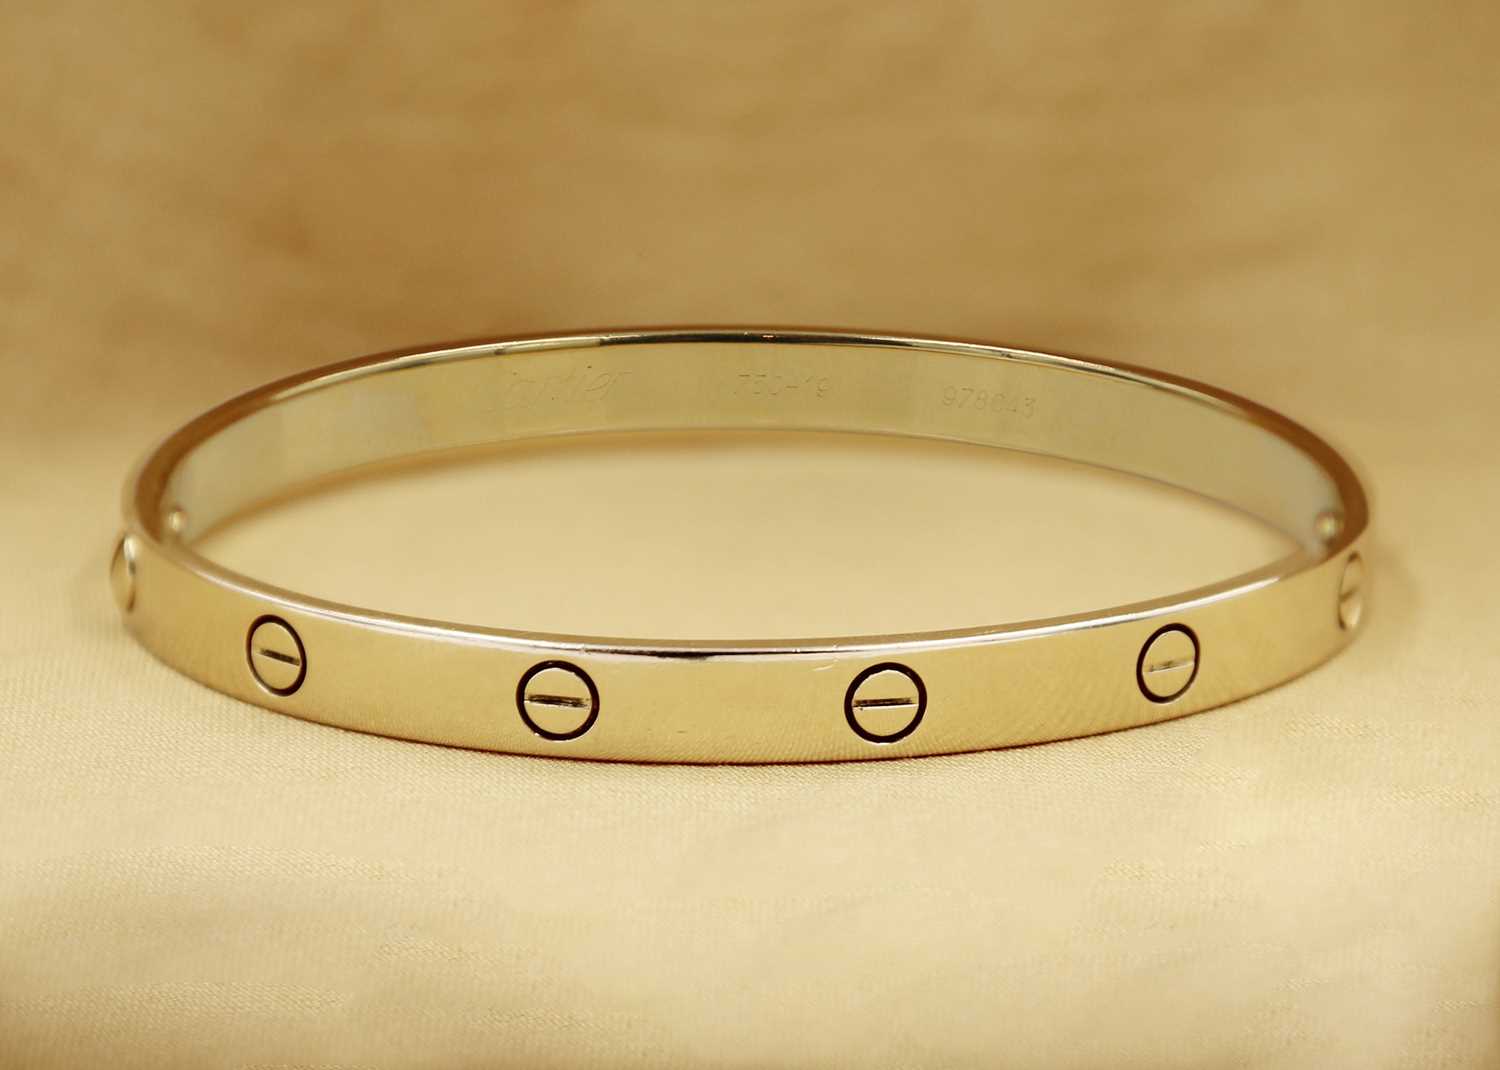 CARTIER - An 18ct love bangle with a screwdriver and original box and bag. - Image 5 of 6